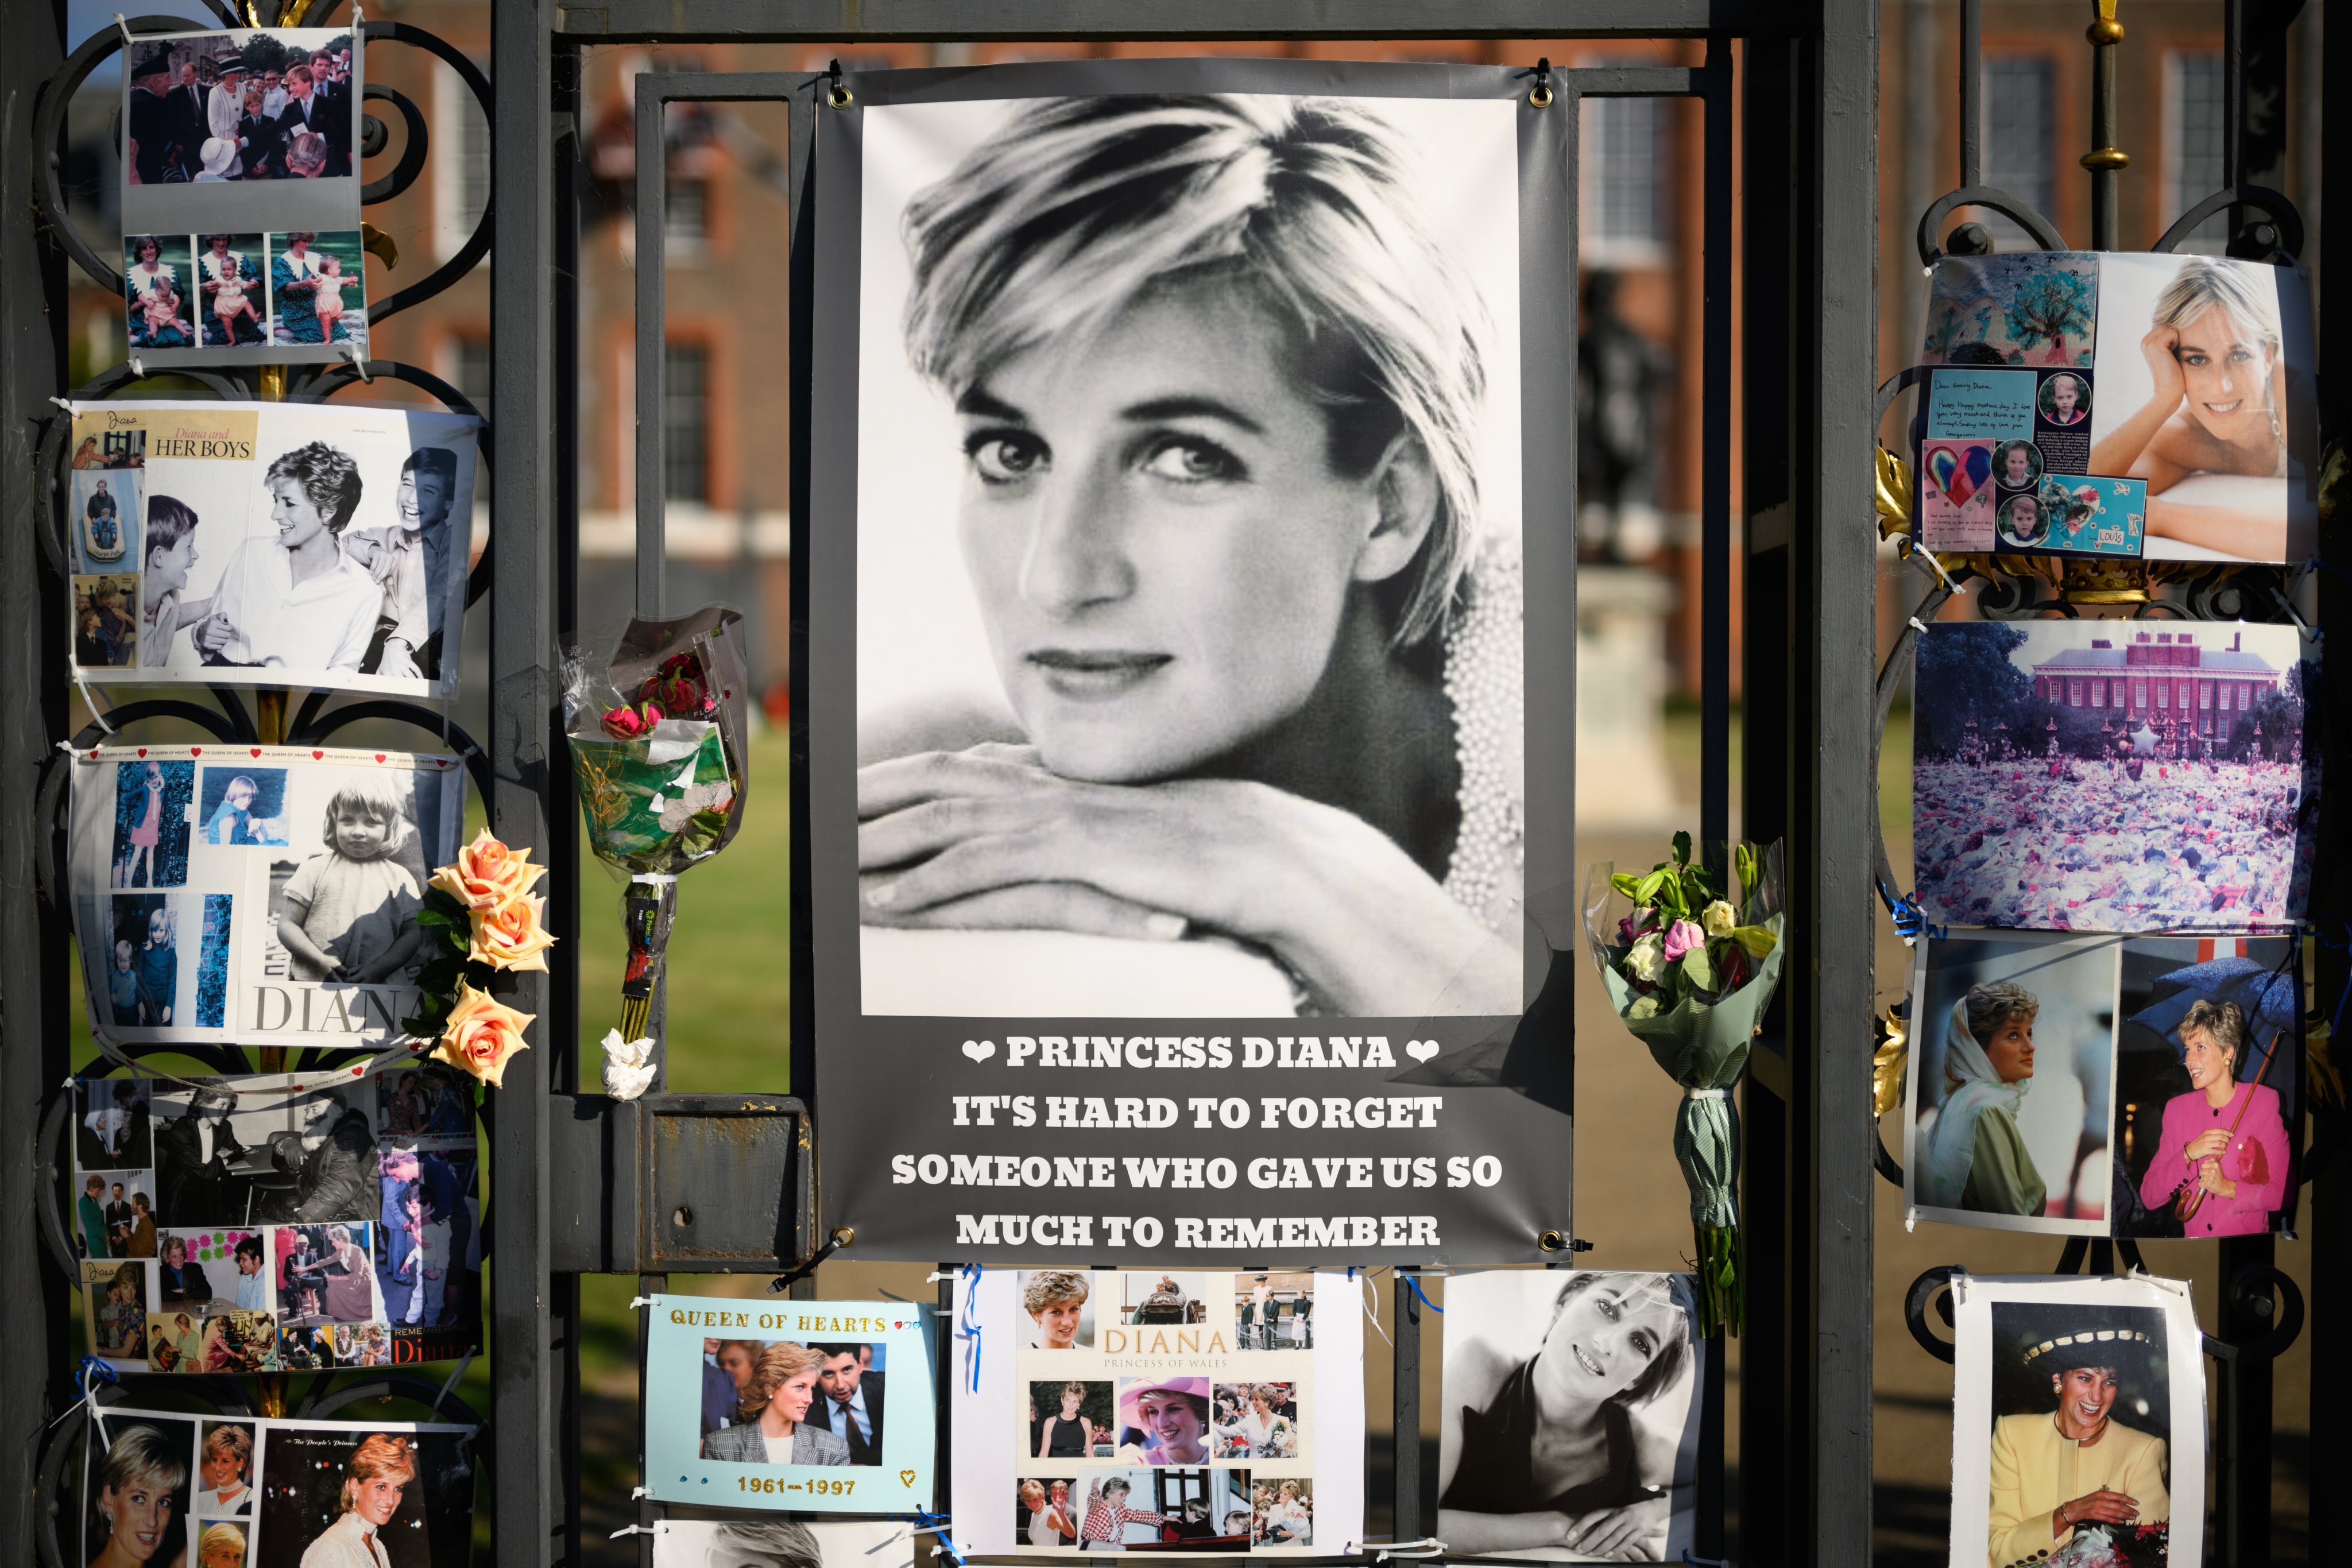 25th Anniversary of Death Of Diana, Princess of Wales